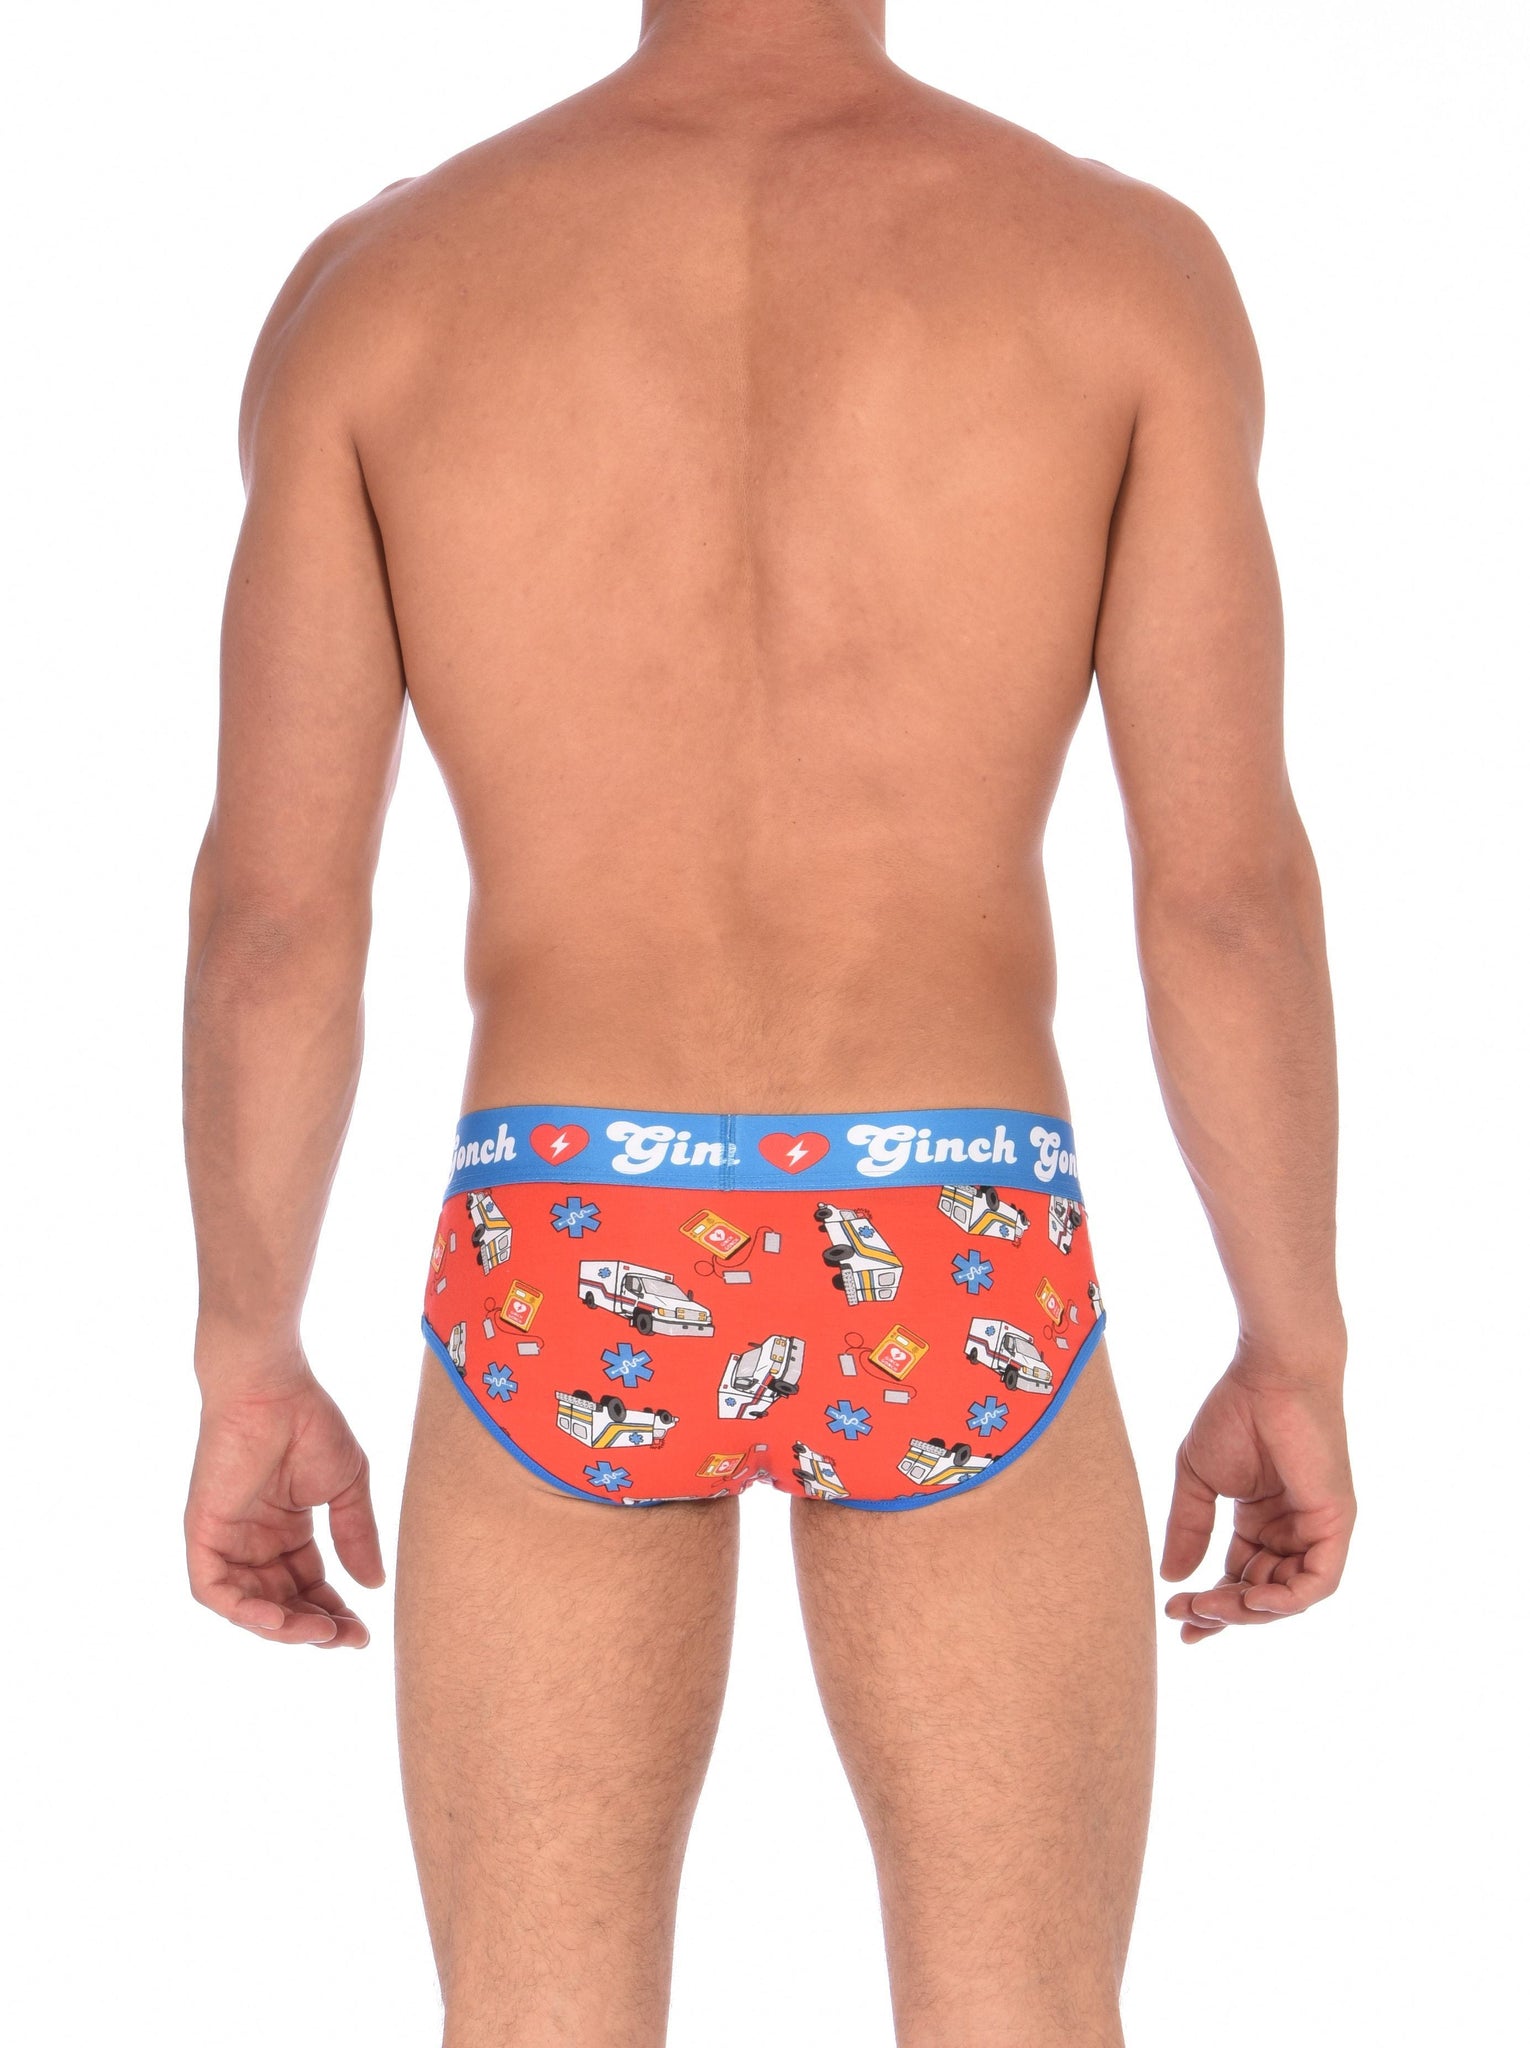 Ginch Gonch GG EMT low rise Brief men's ambulance print with medical symbol and equipment on red background with blue trim and printed waistband back